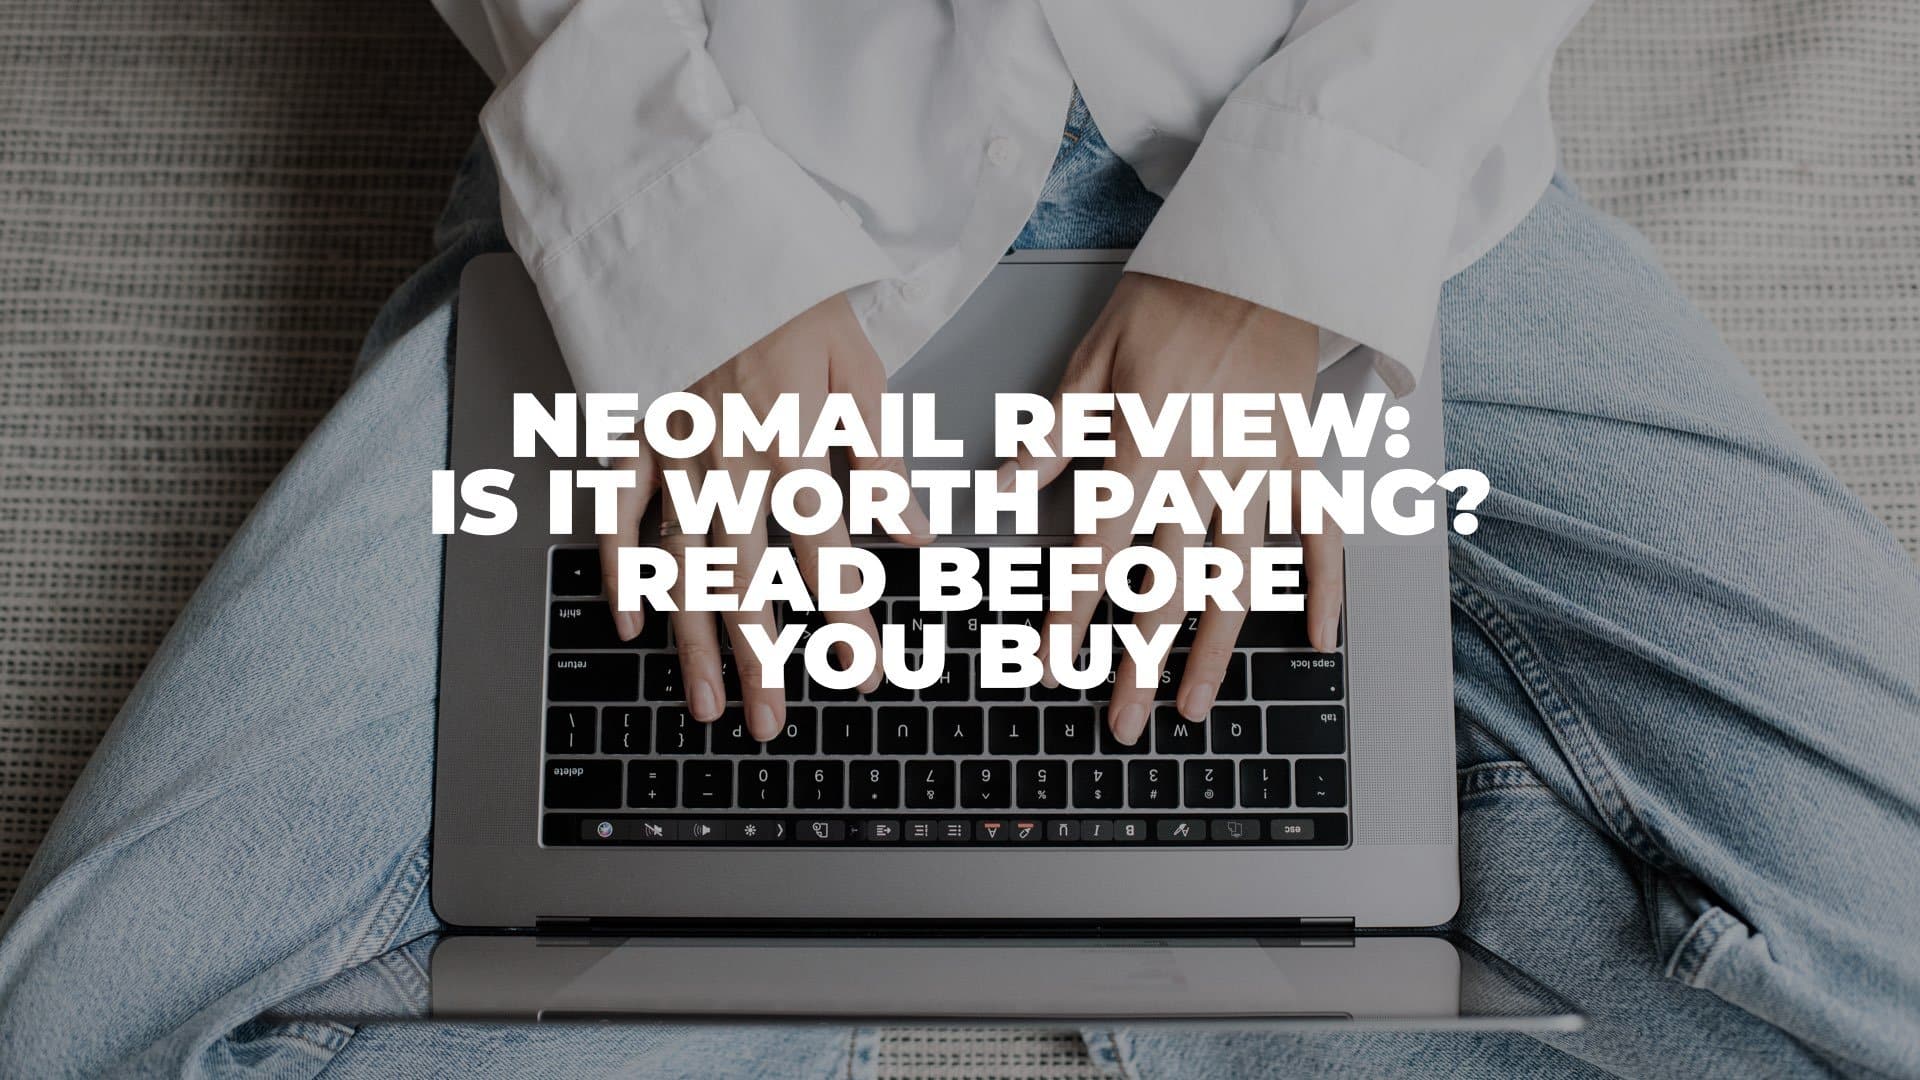 NeoMail Review - Featured Image